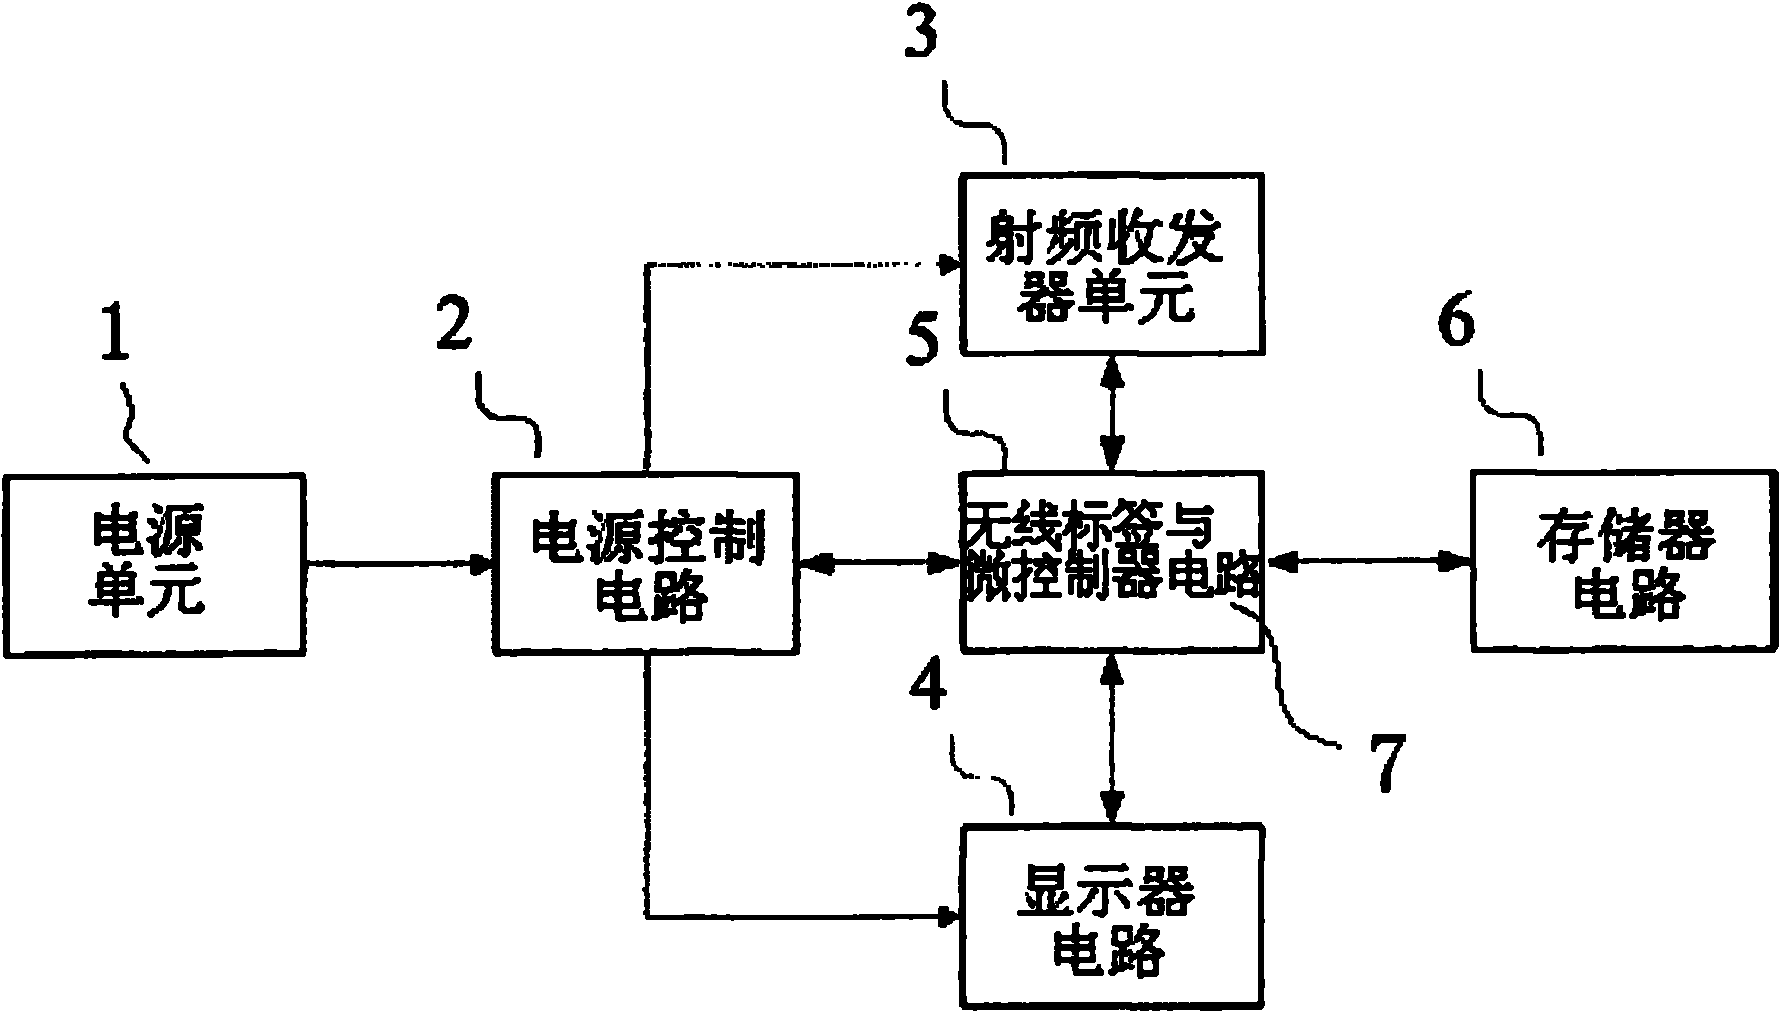 Electronic shelf label system and working mode thereof